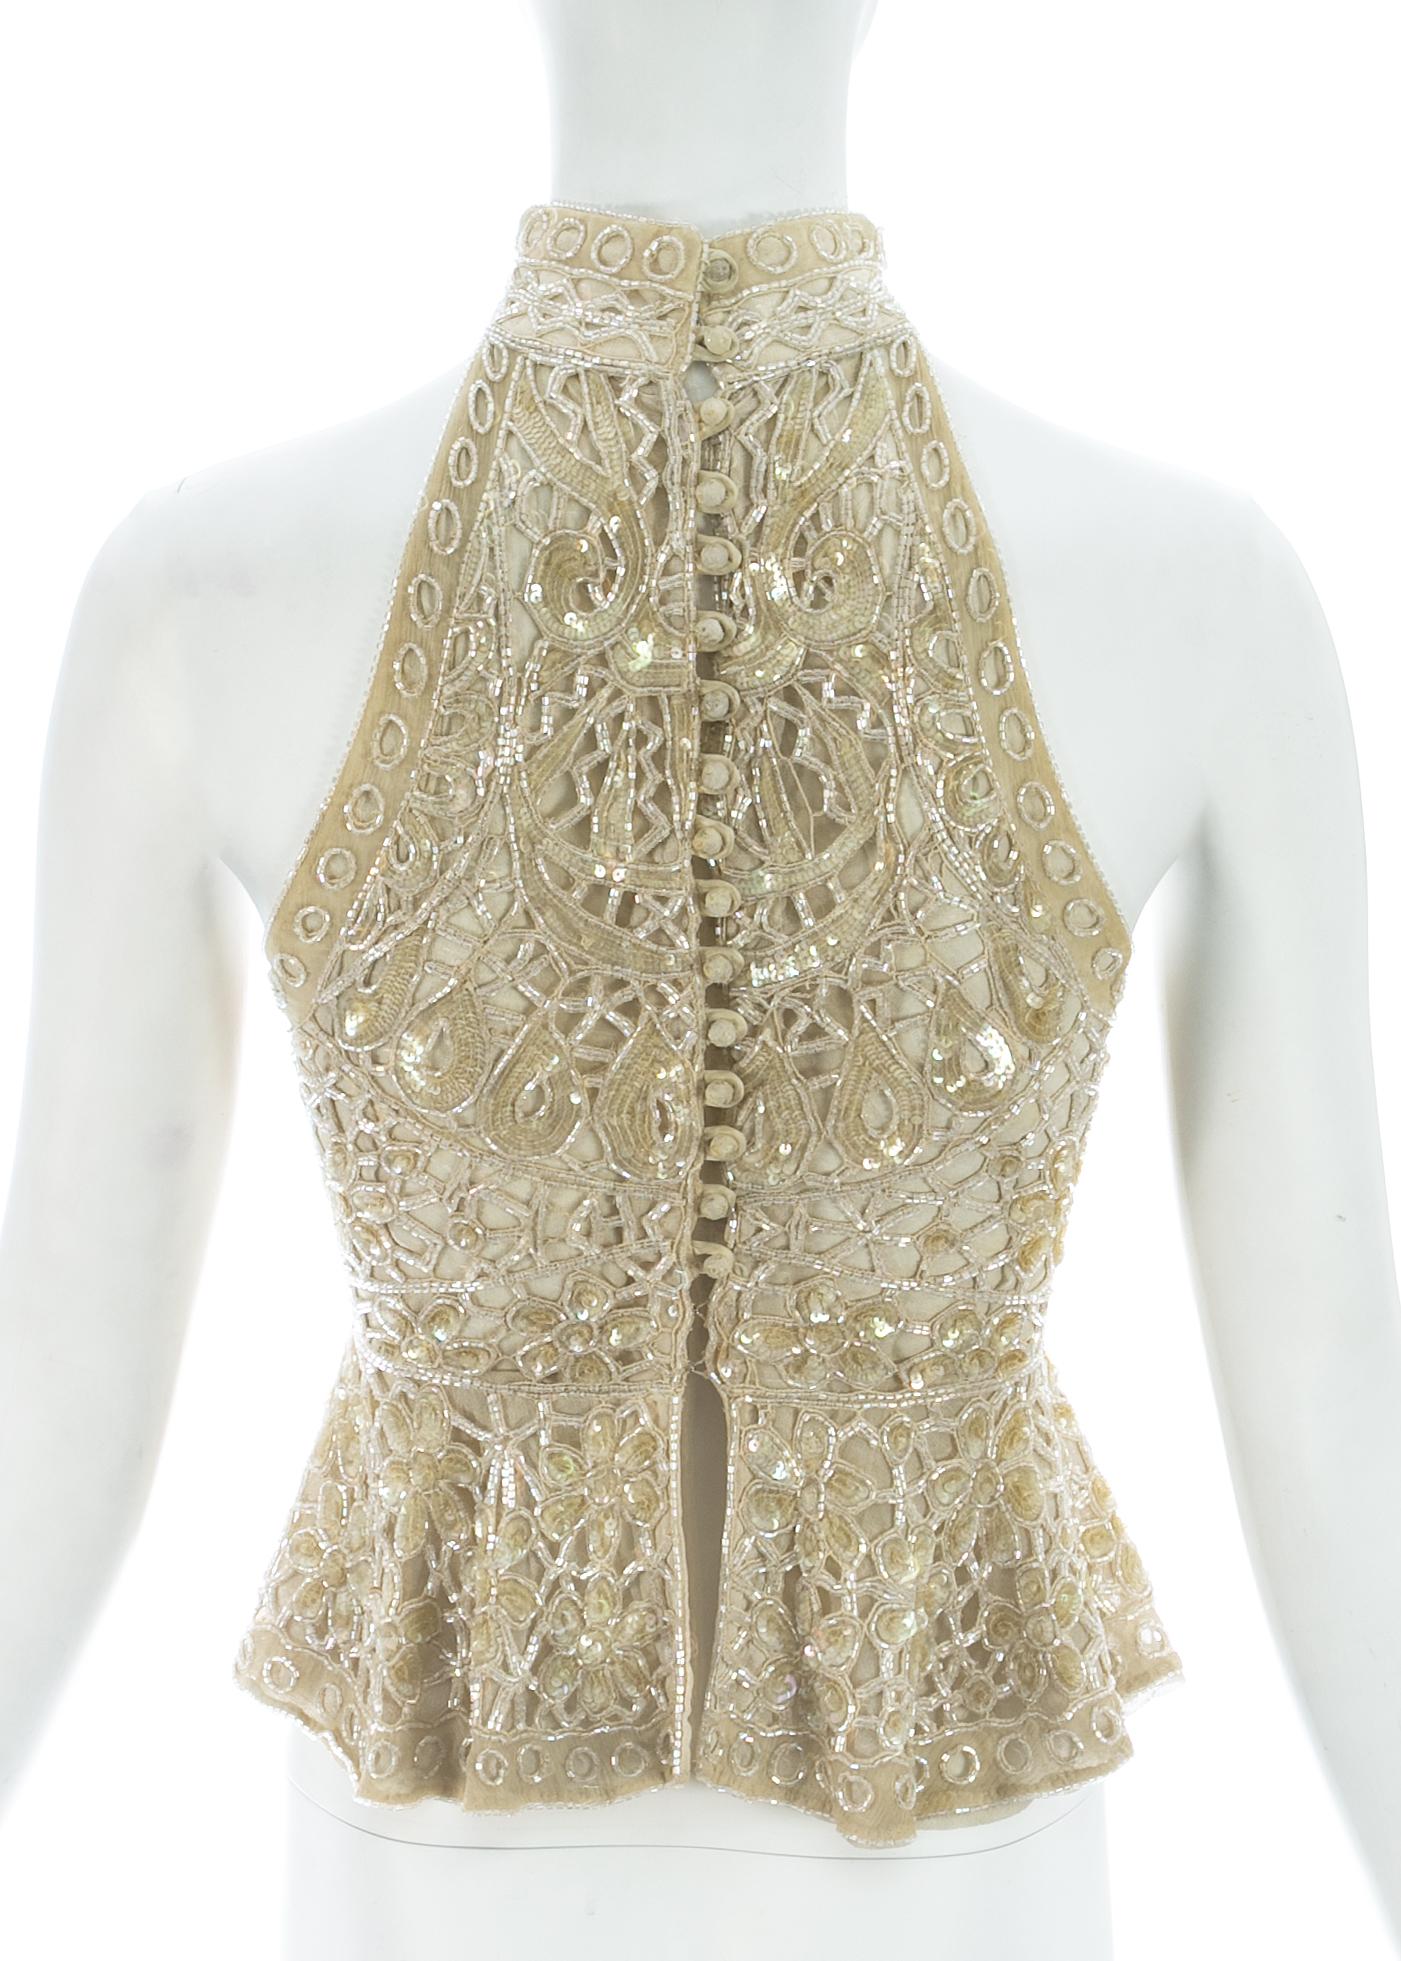 Eavis & Brown ivory beaded and sequin net halter neck evening blouse, c. 1990s 1